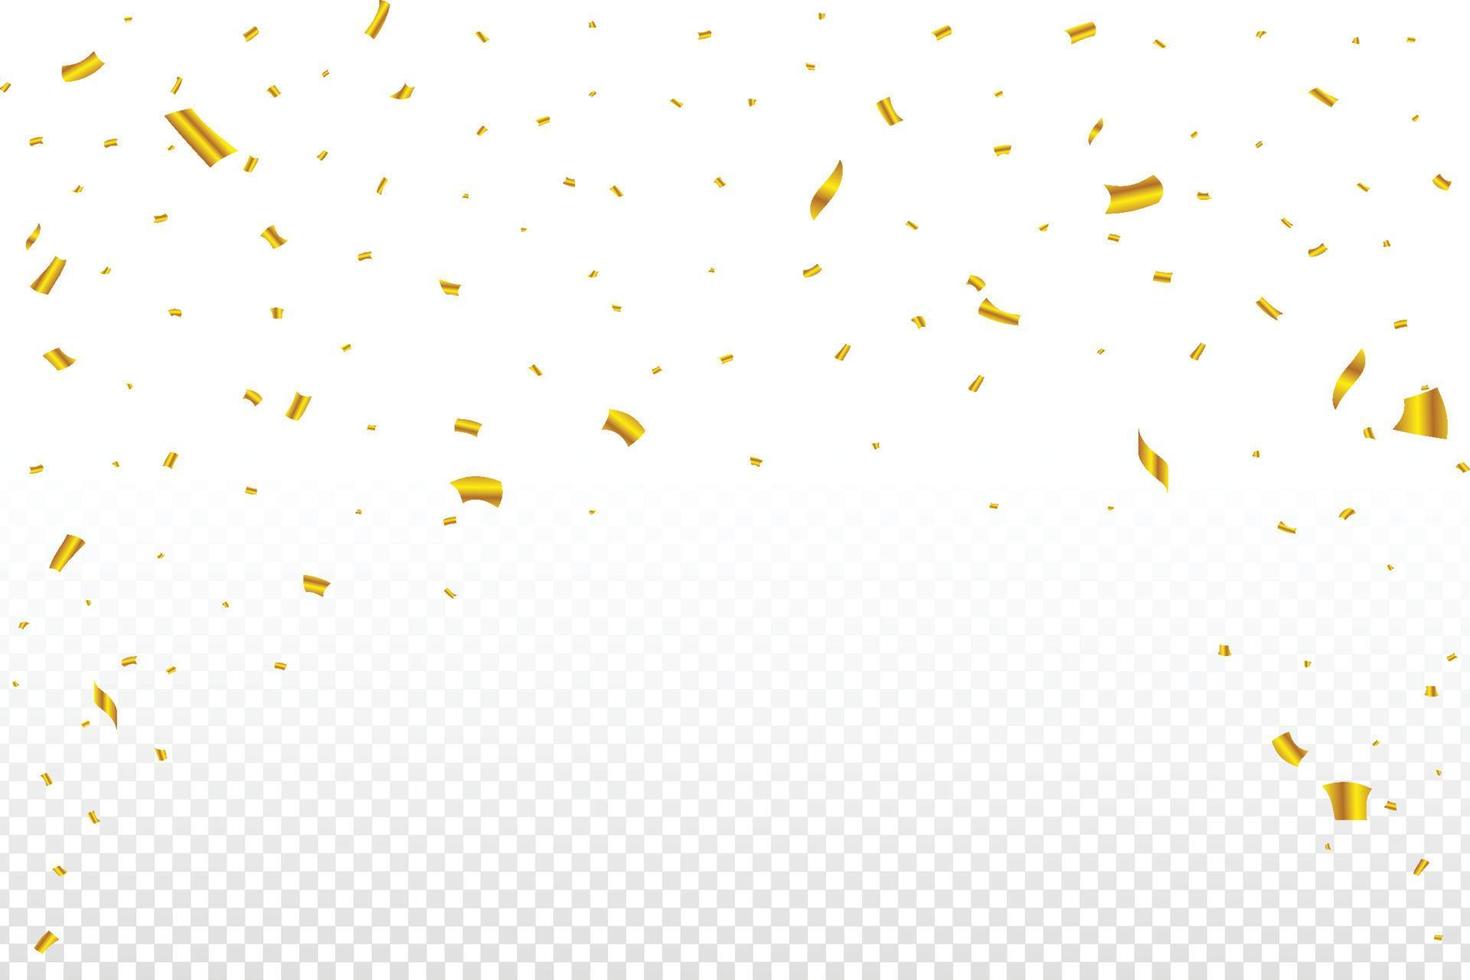 Golden confetti falling isolated on transparent background. Carnival elements. Confetti vector illustration for festival background. Golden party tinsel and confetti falling. Anniversary celebration.